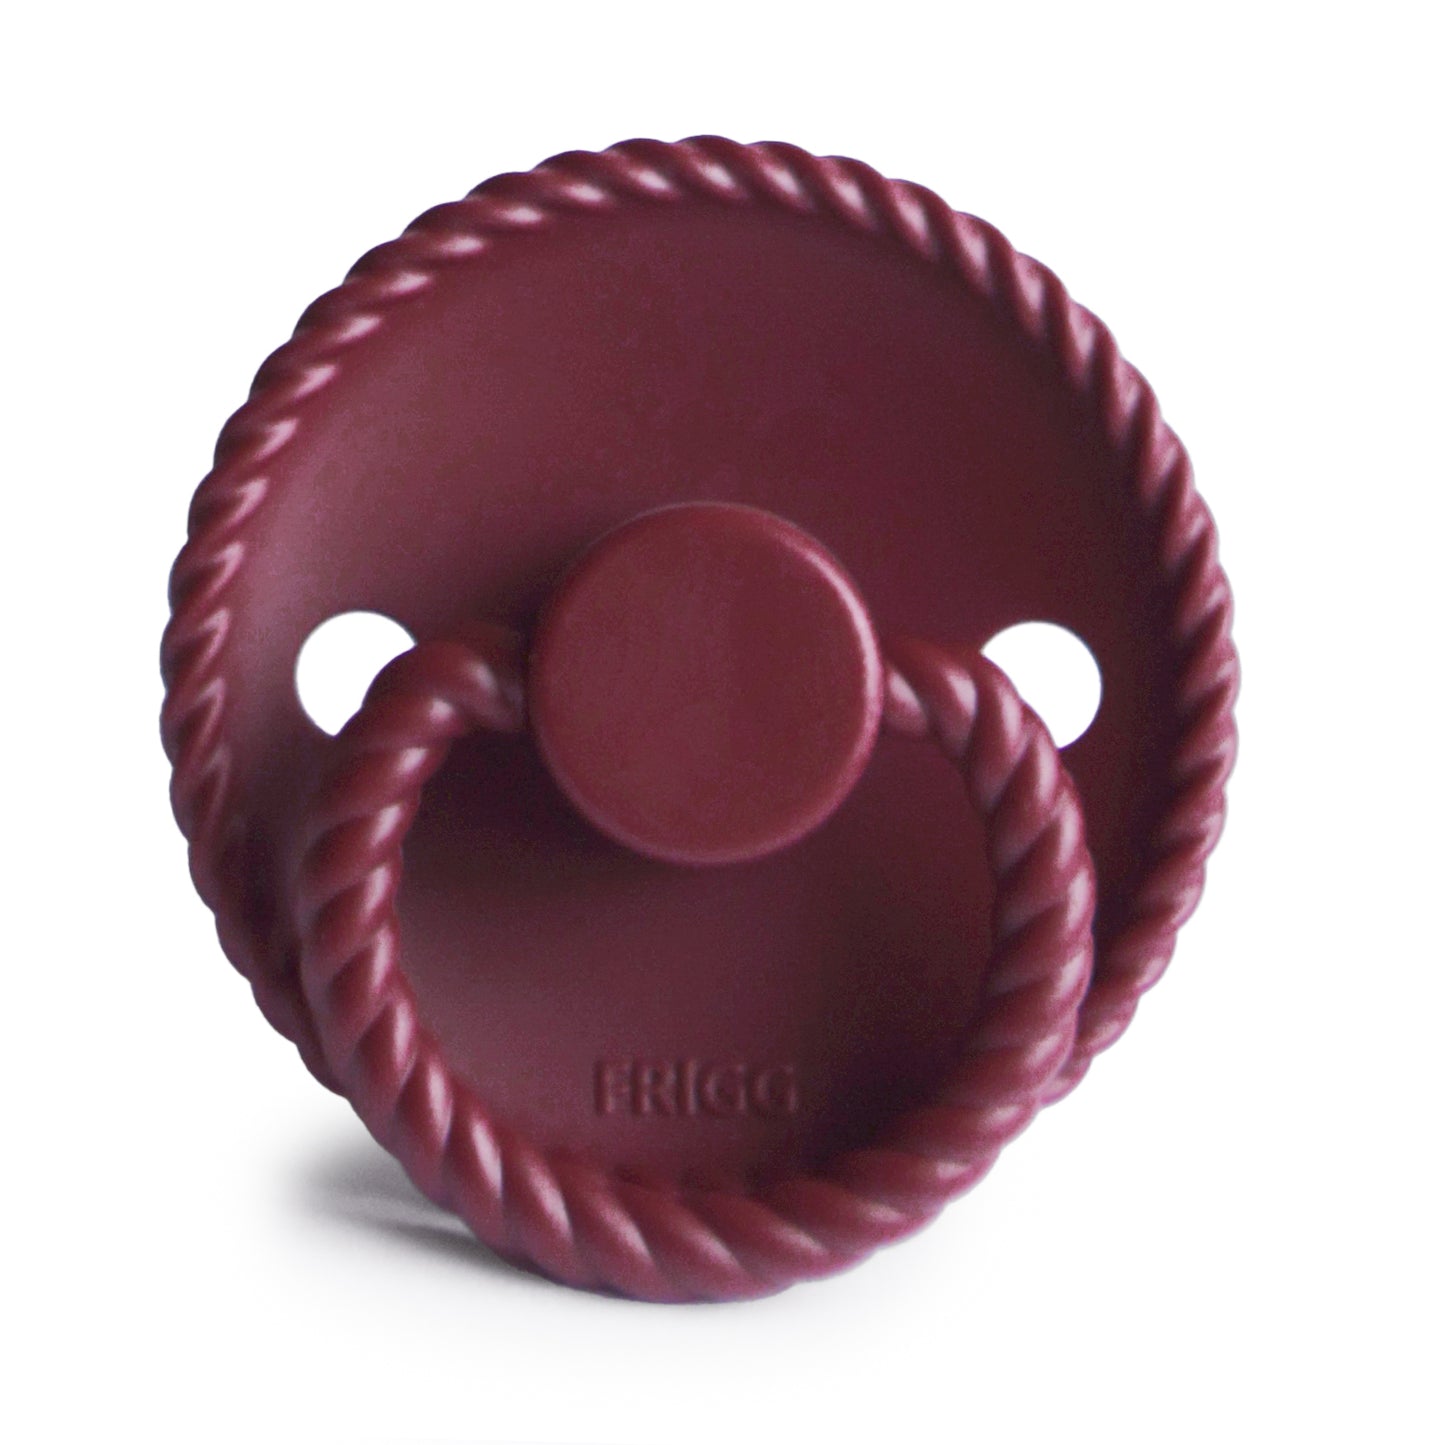 FRIGG Rope Silicone Baby Pacifier 1-Pack Sweet Cherry Size 1 (0-6 Months)